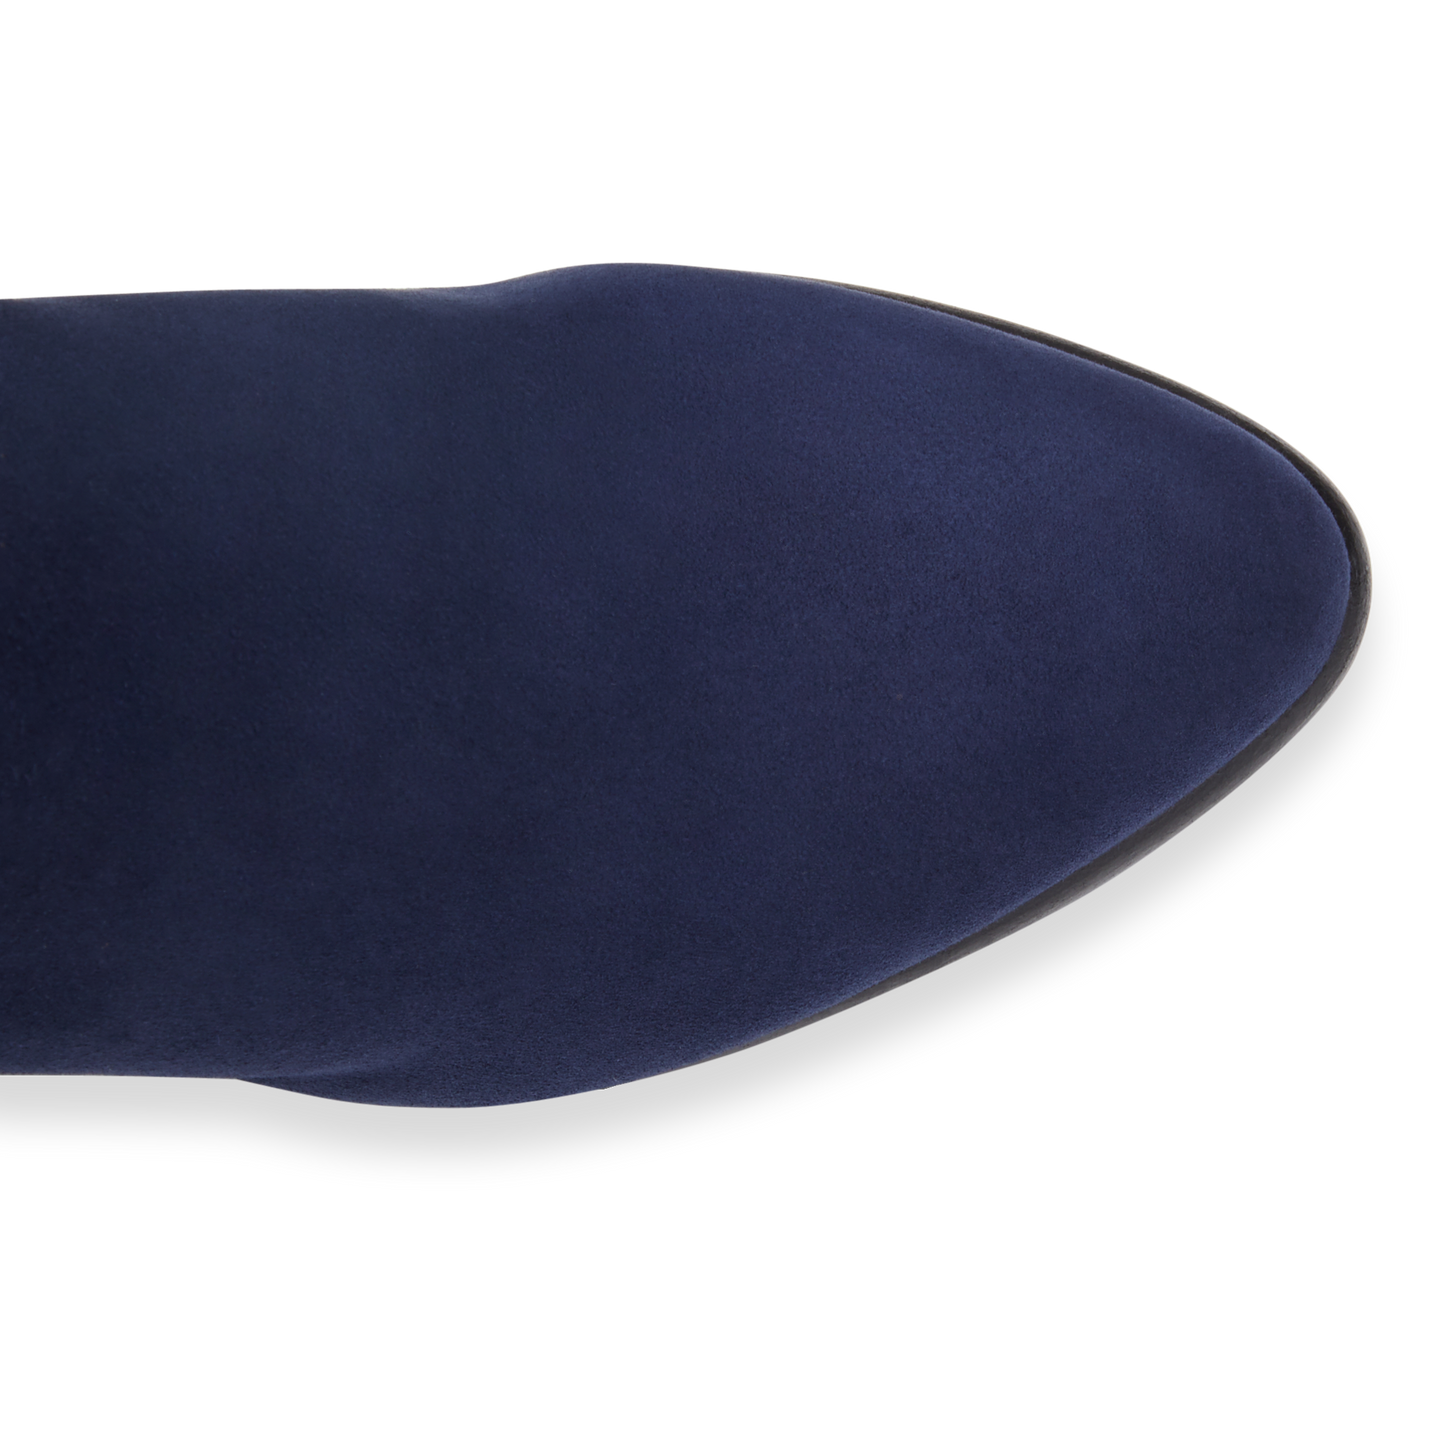 Perfect Stretch Boot in Water-Resistant Navy Suede